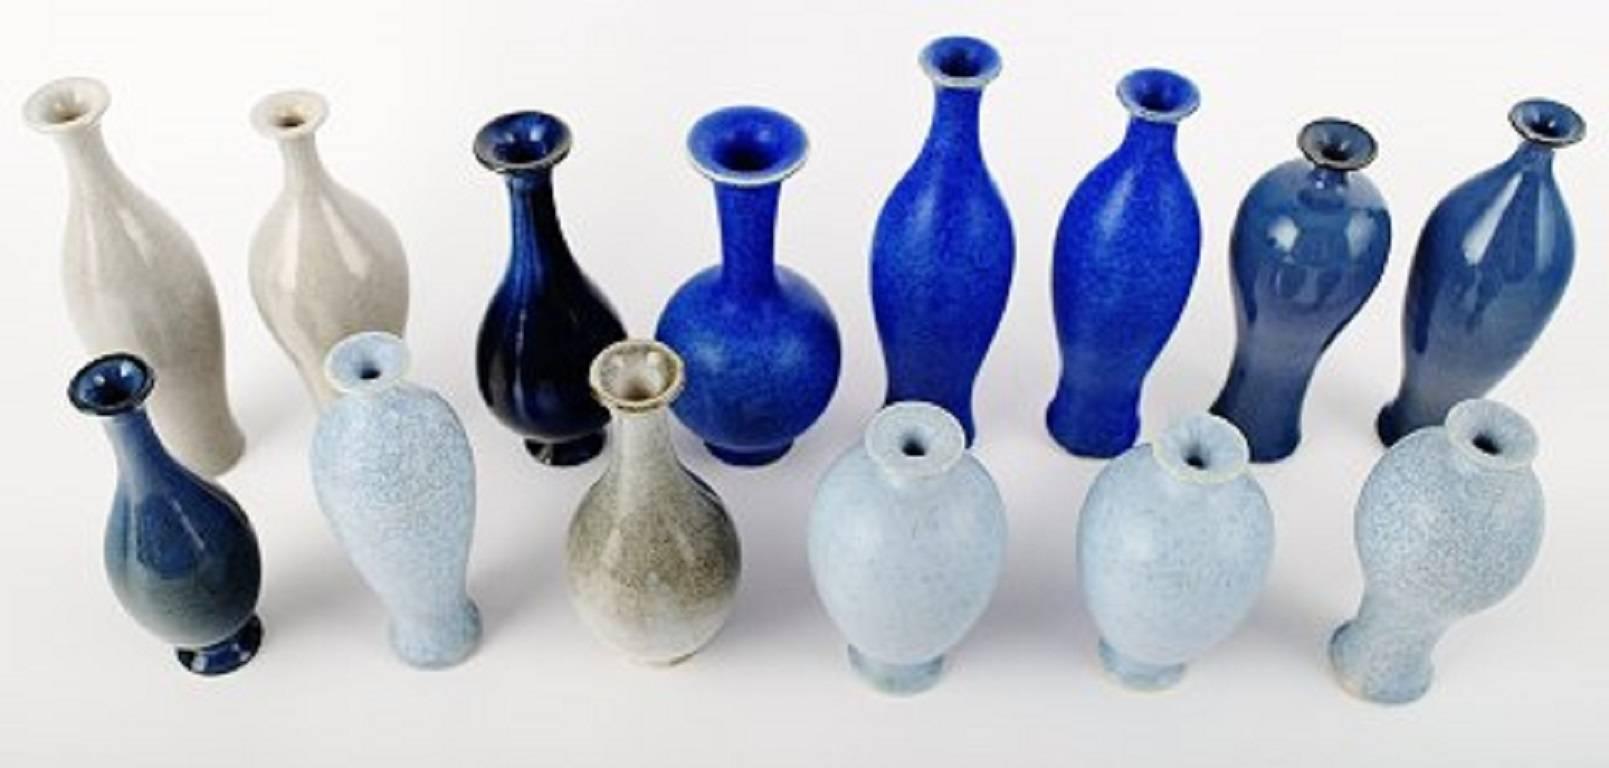 Collection of 14 unique miniature ceramic vases by Per Liljegren.

Signed. 

In perfect condition. 

Swedish design. 

Beautiful glazes.

Height from 8.5 cm to 14 cm.